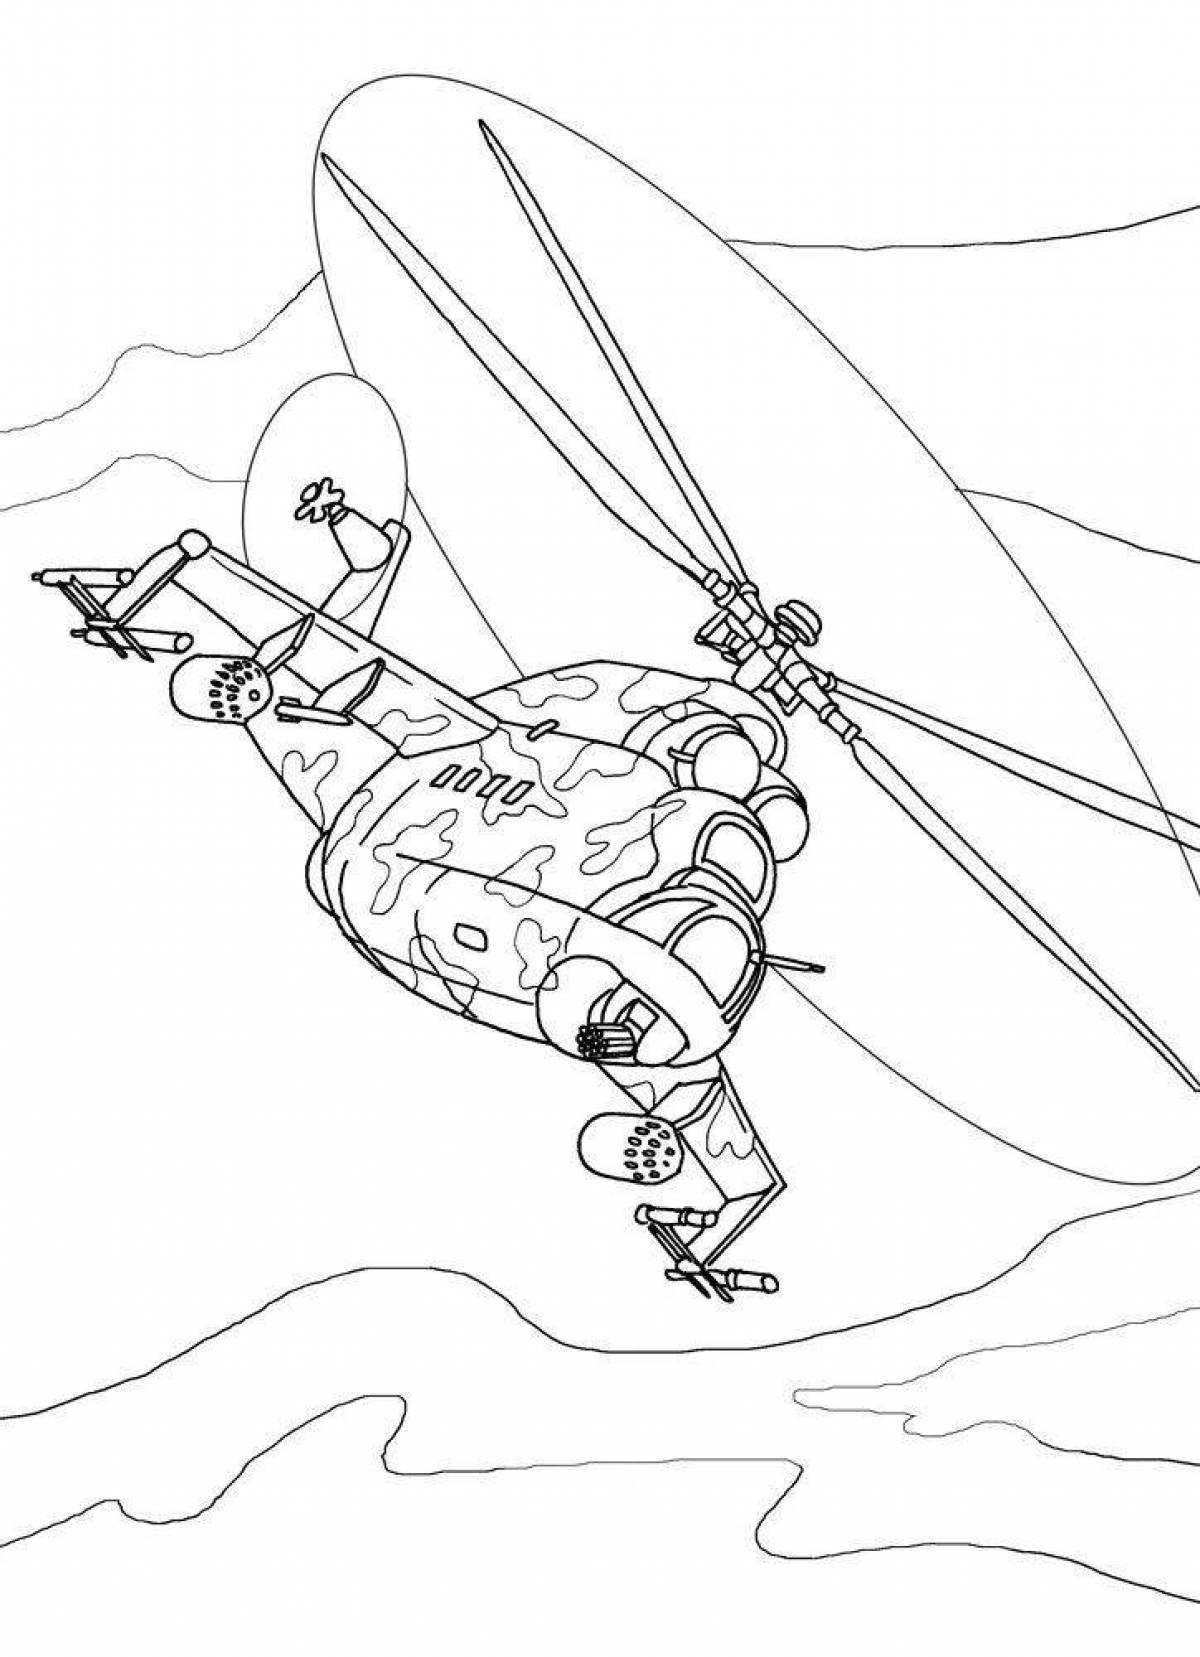 Coloring page cheerful paratrooper